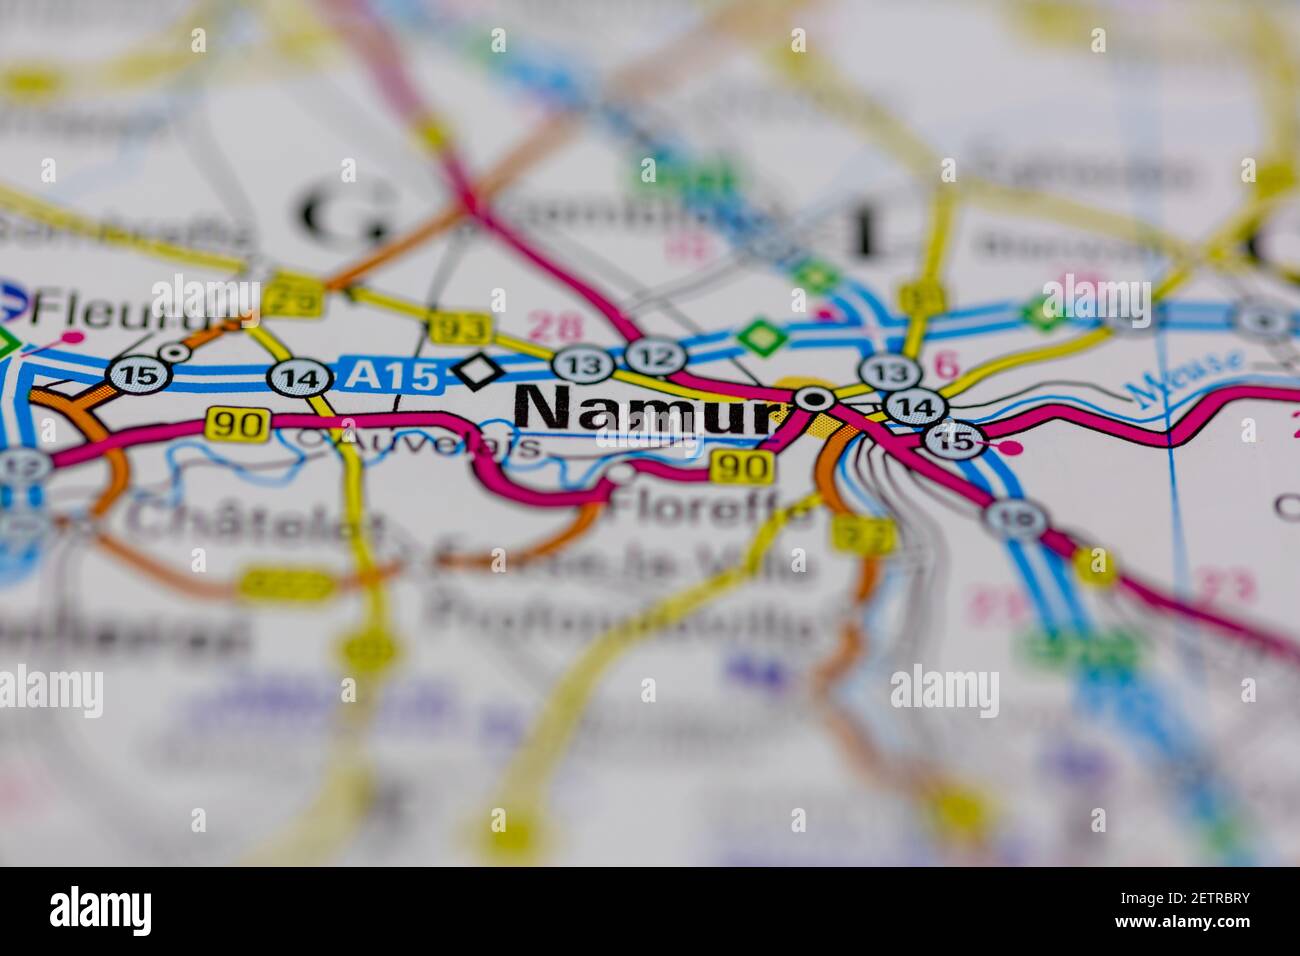 Namur Shown on a road map or Geography map and atlas Stock Photo